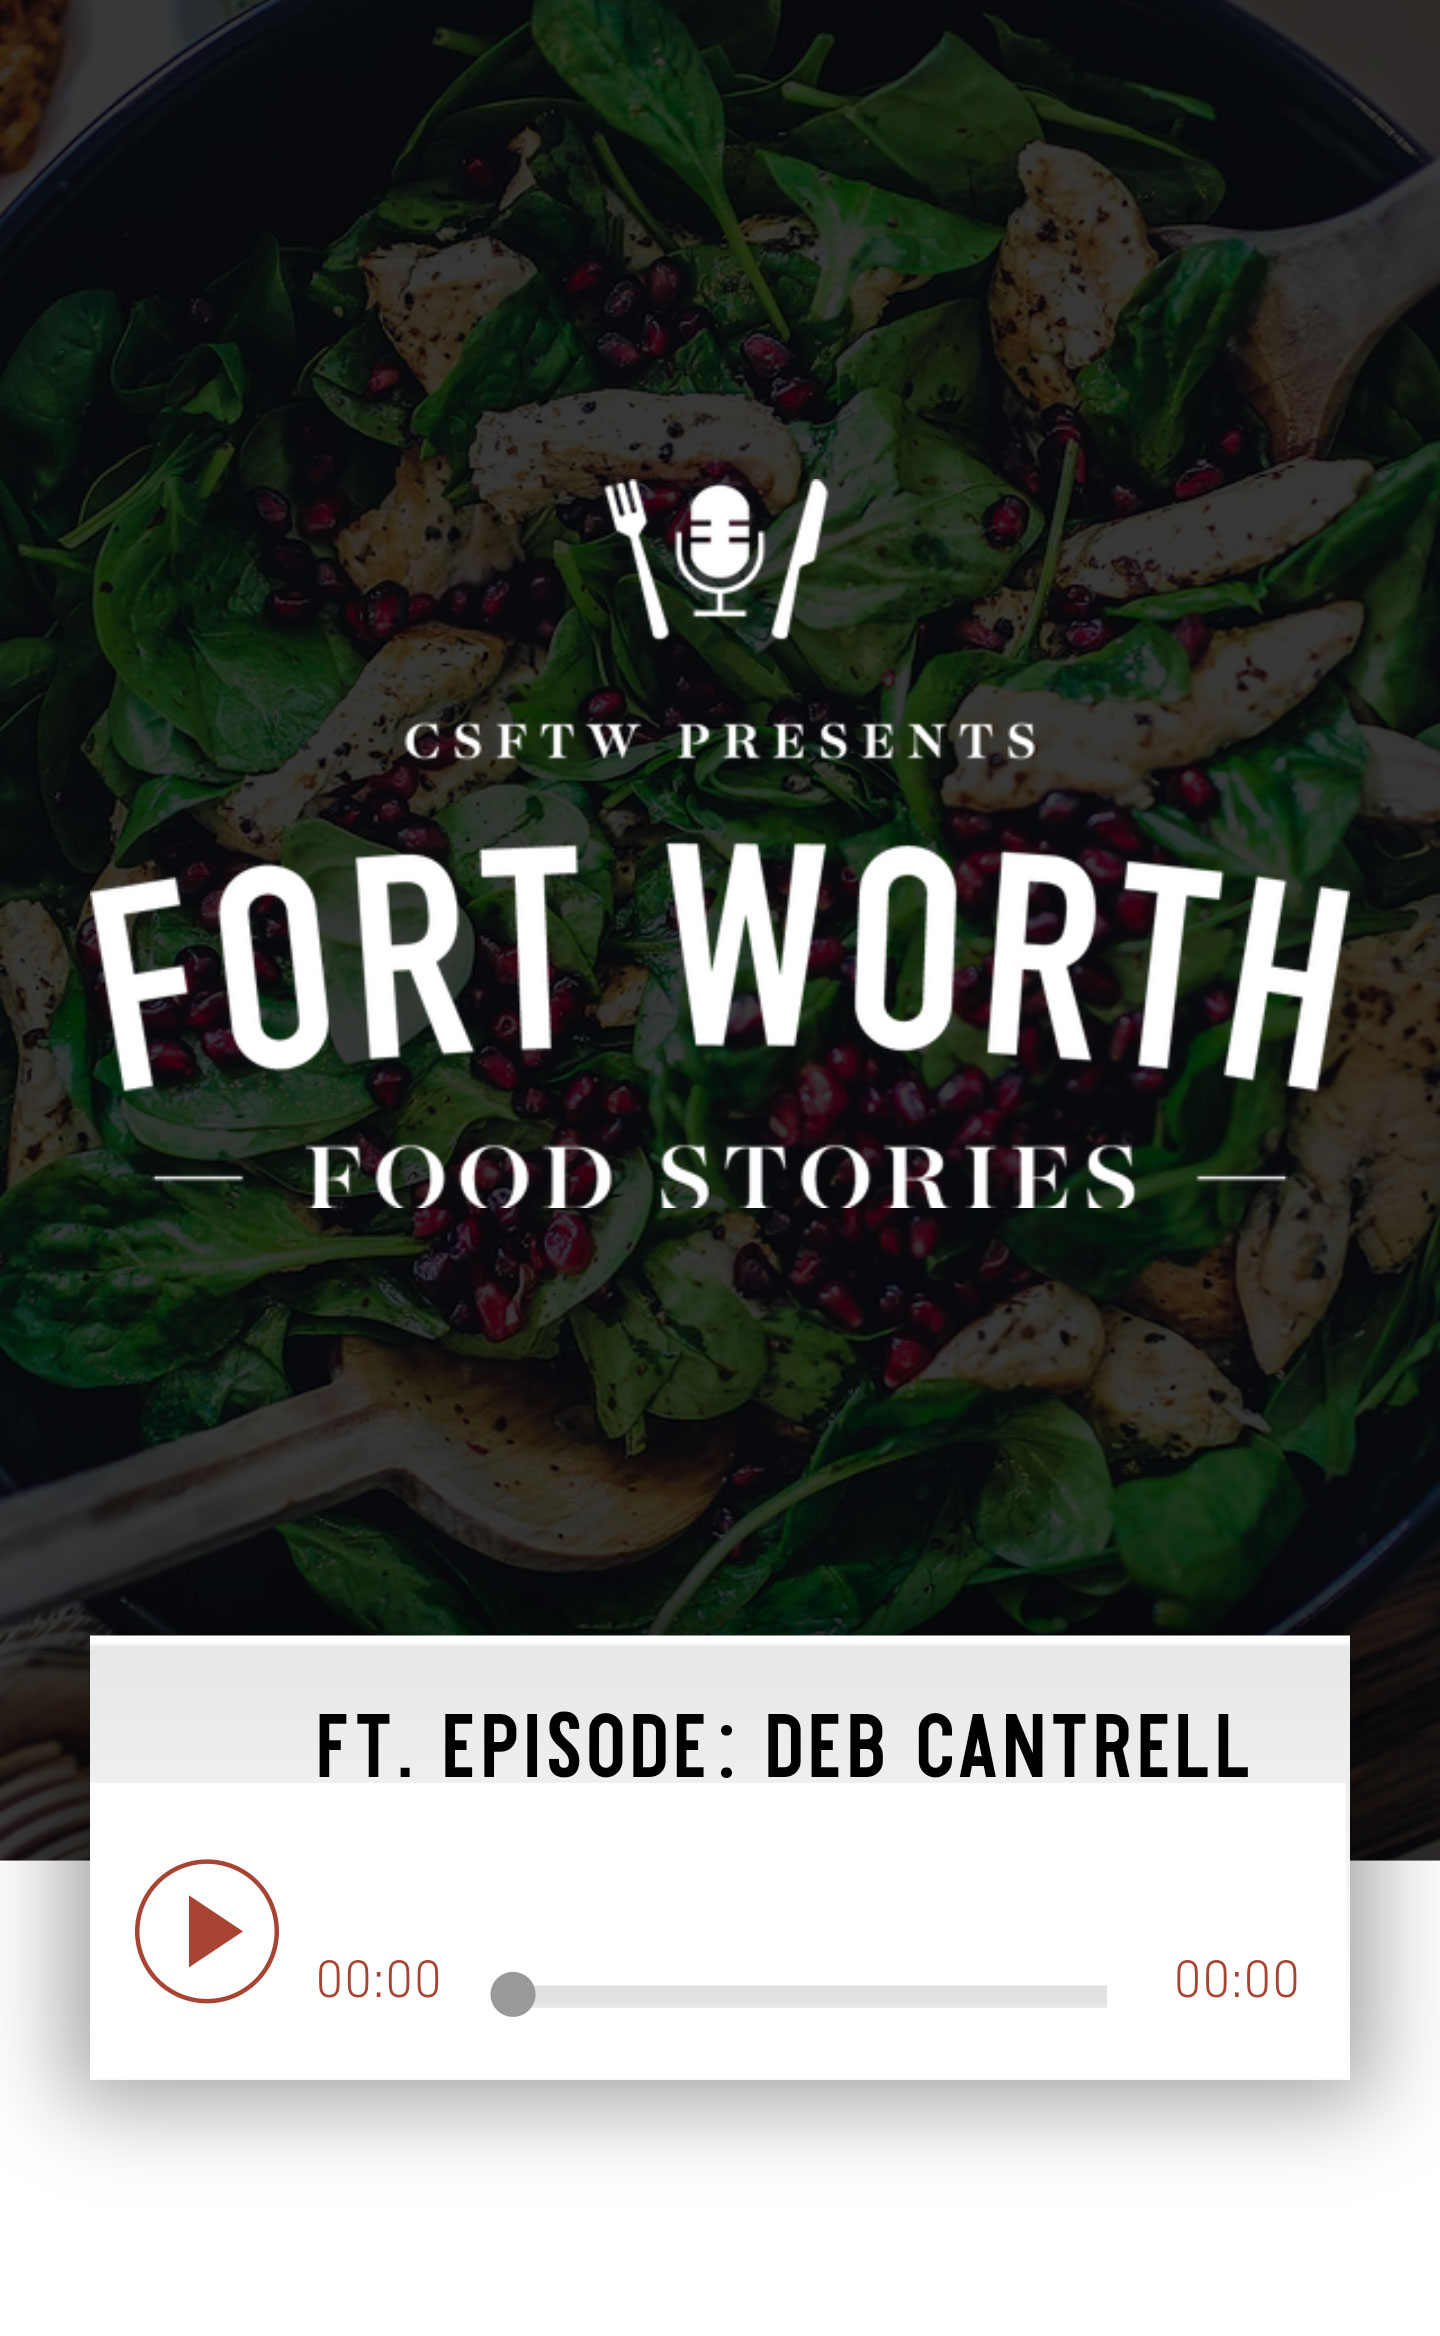 Our Fort Worth Food Story